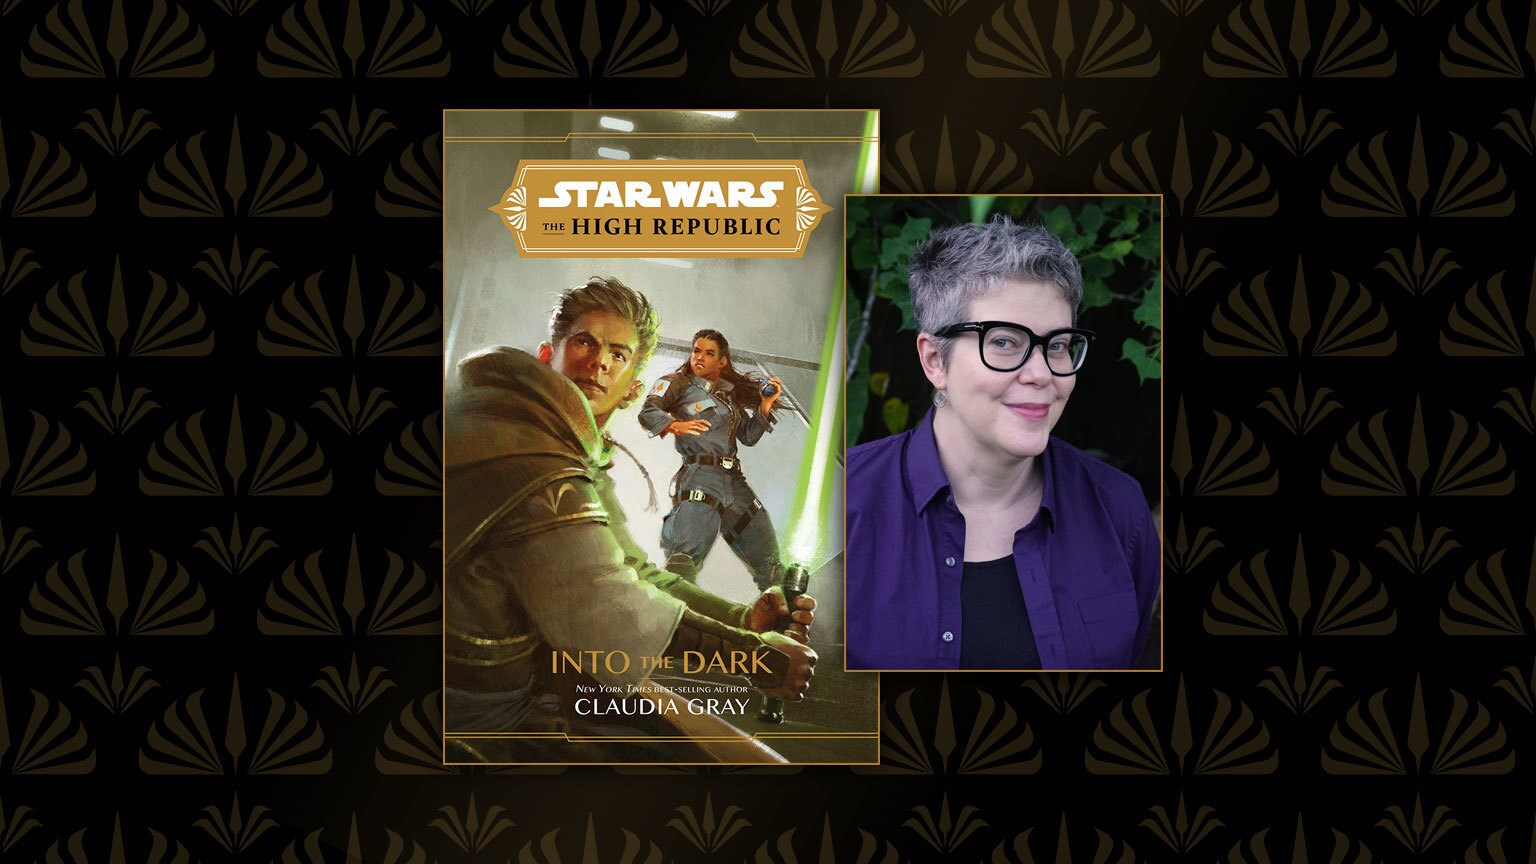 The Makers of Star Wars: The High Republic: Claudia Gray on Into the Dark